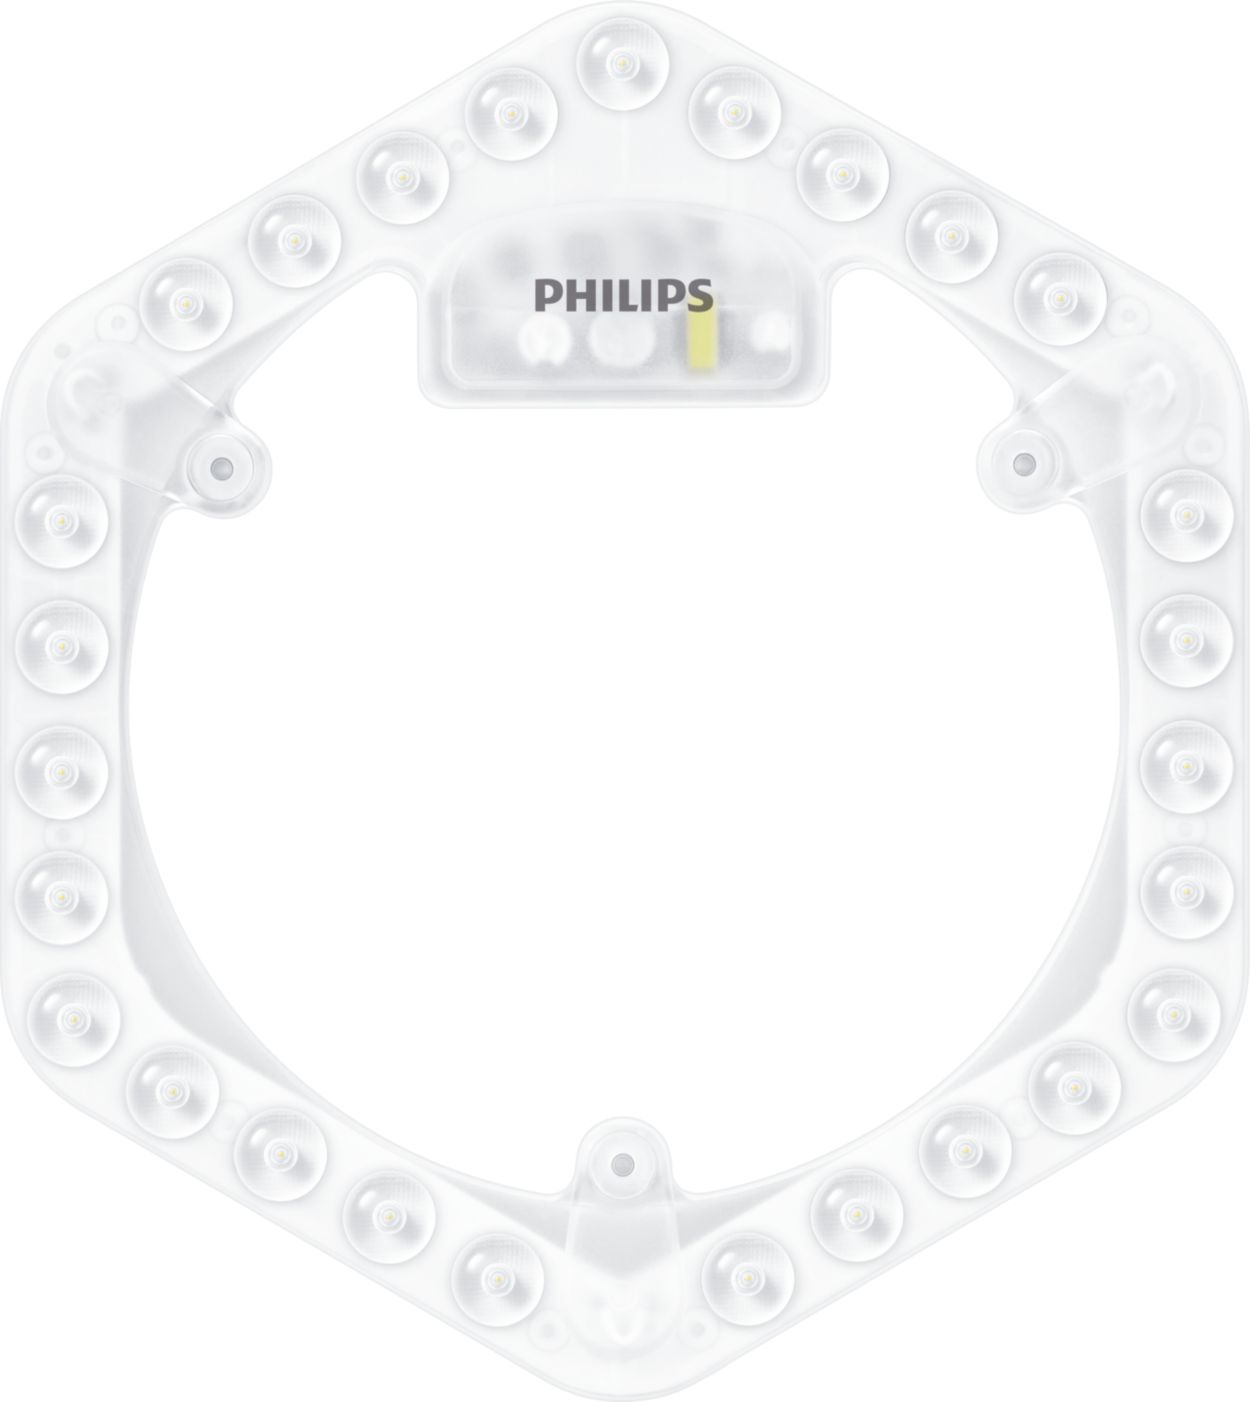 A superior replacement solution for the light source in ceiling luminaire